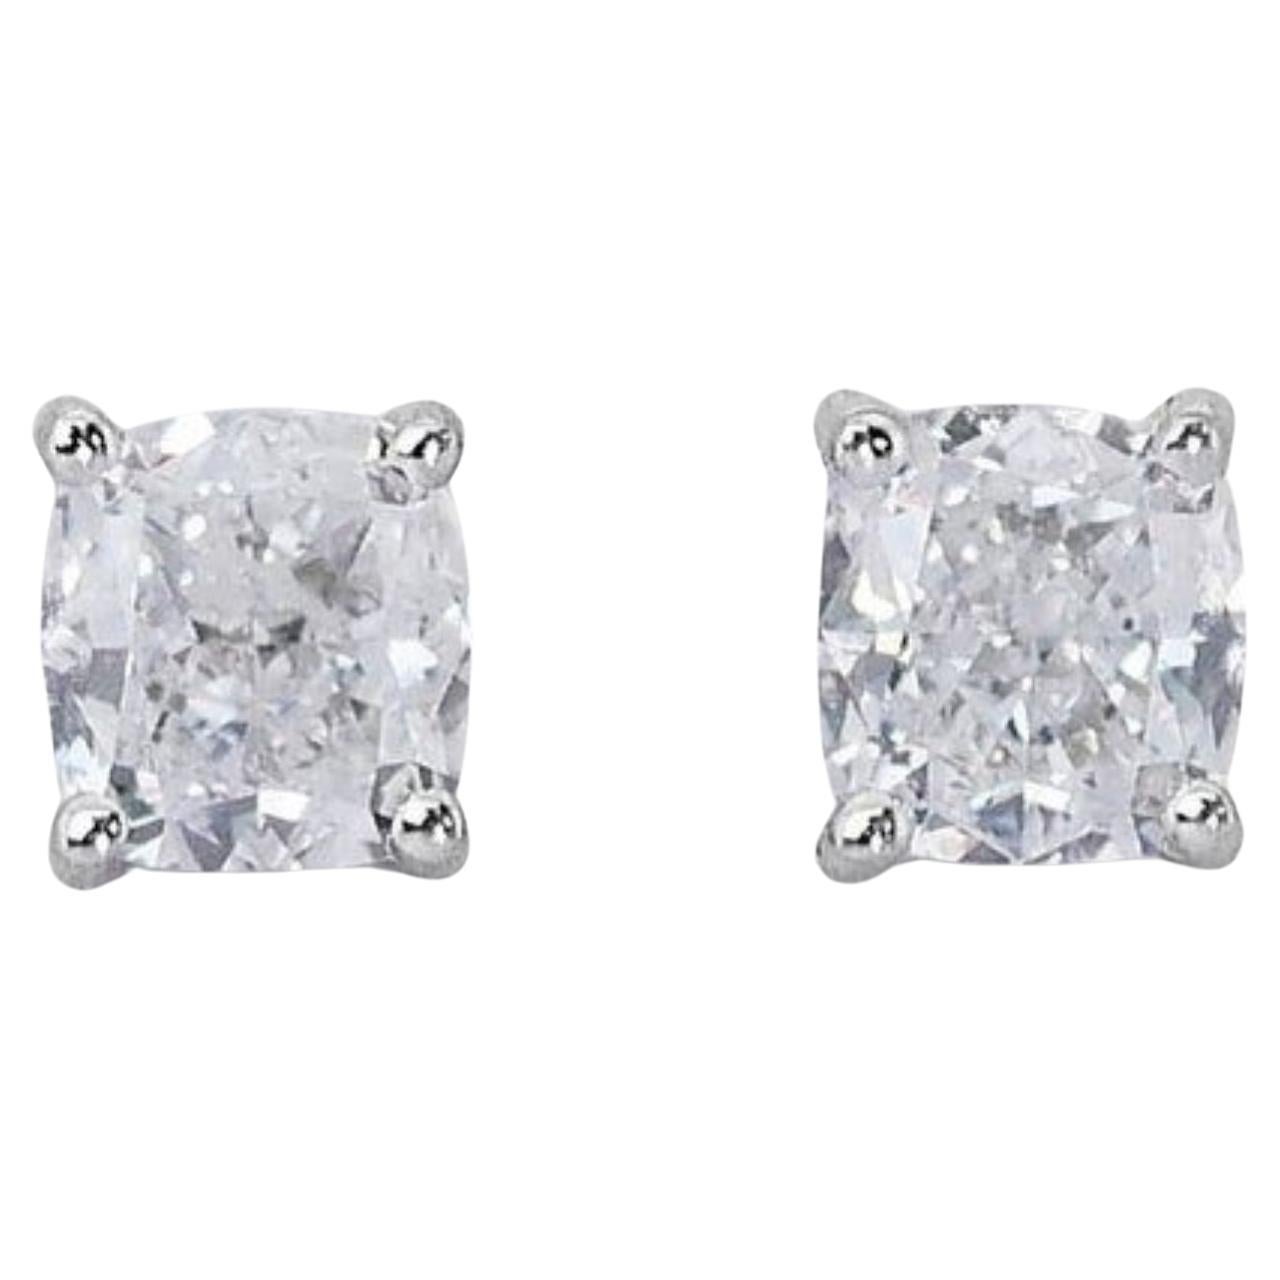 Stunning 1.40ct Cushion Modified Diamond Earrings set in 18K White Gold For Sale